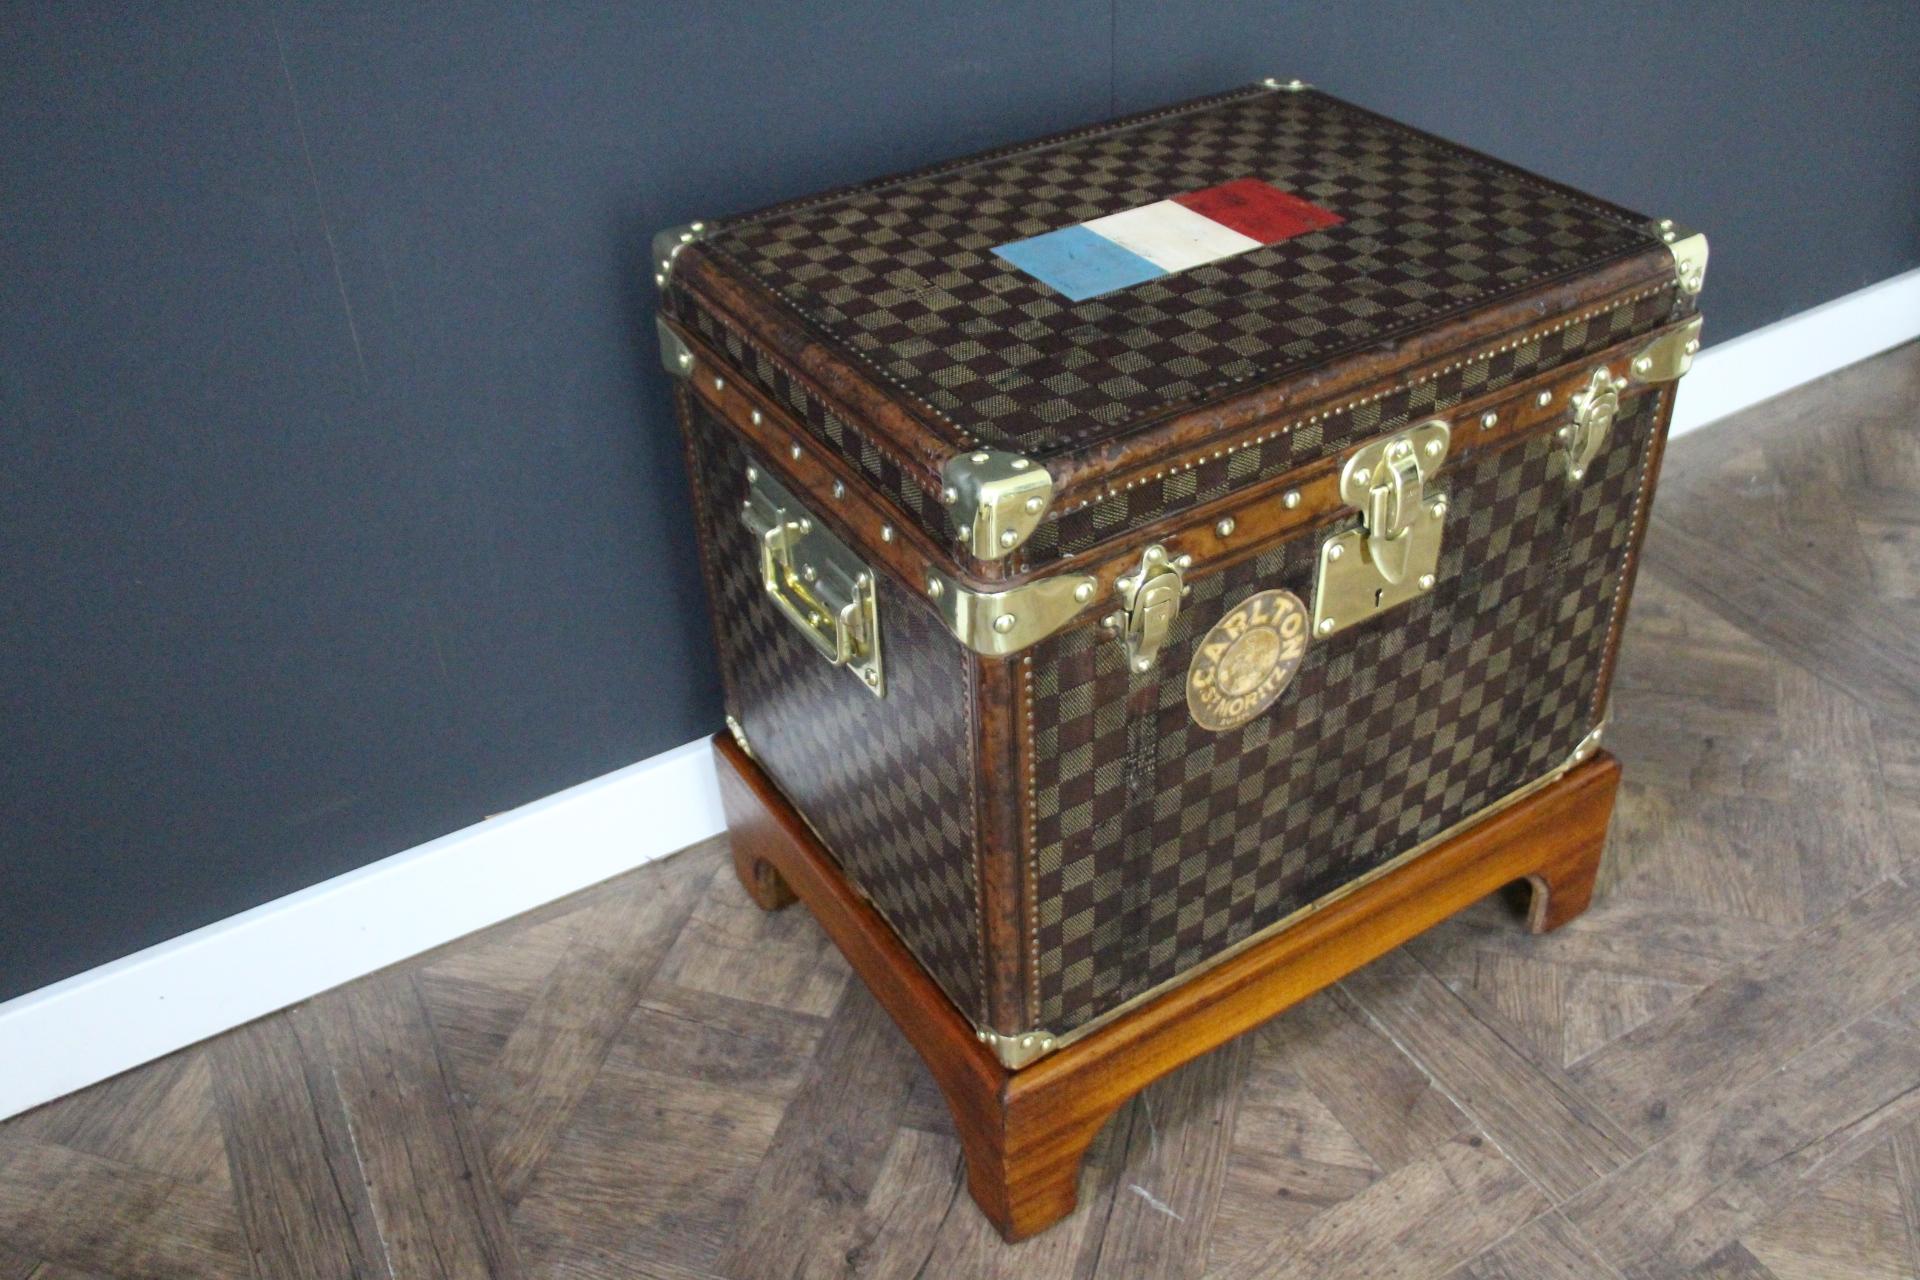 French Small Louis Vuitton Checkers Steamer Trunk, Vuitton Shoe Trunk, Vuitton trunk